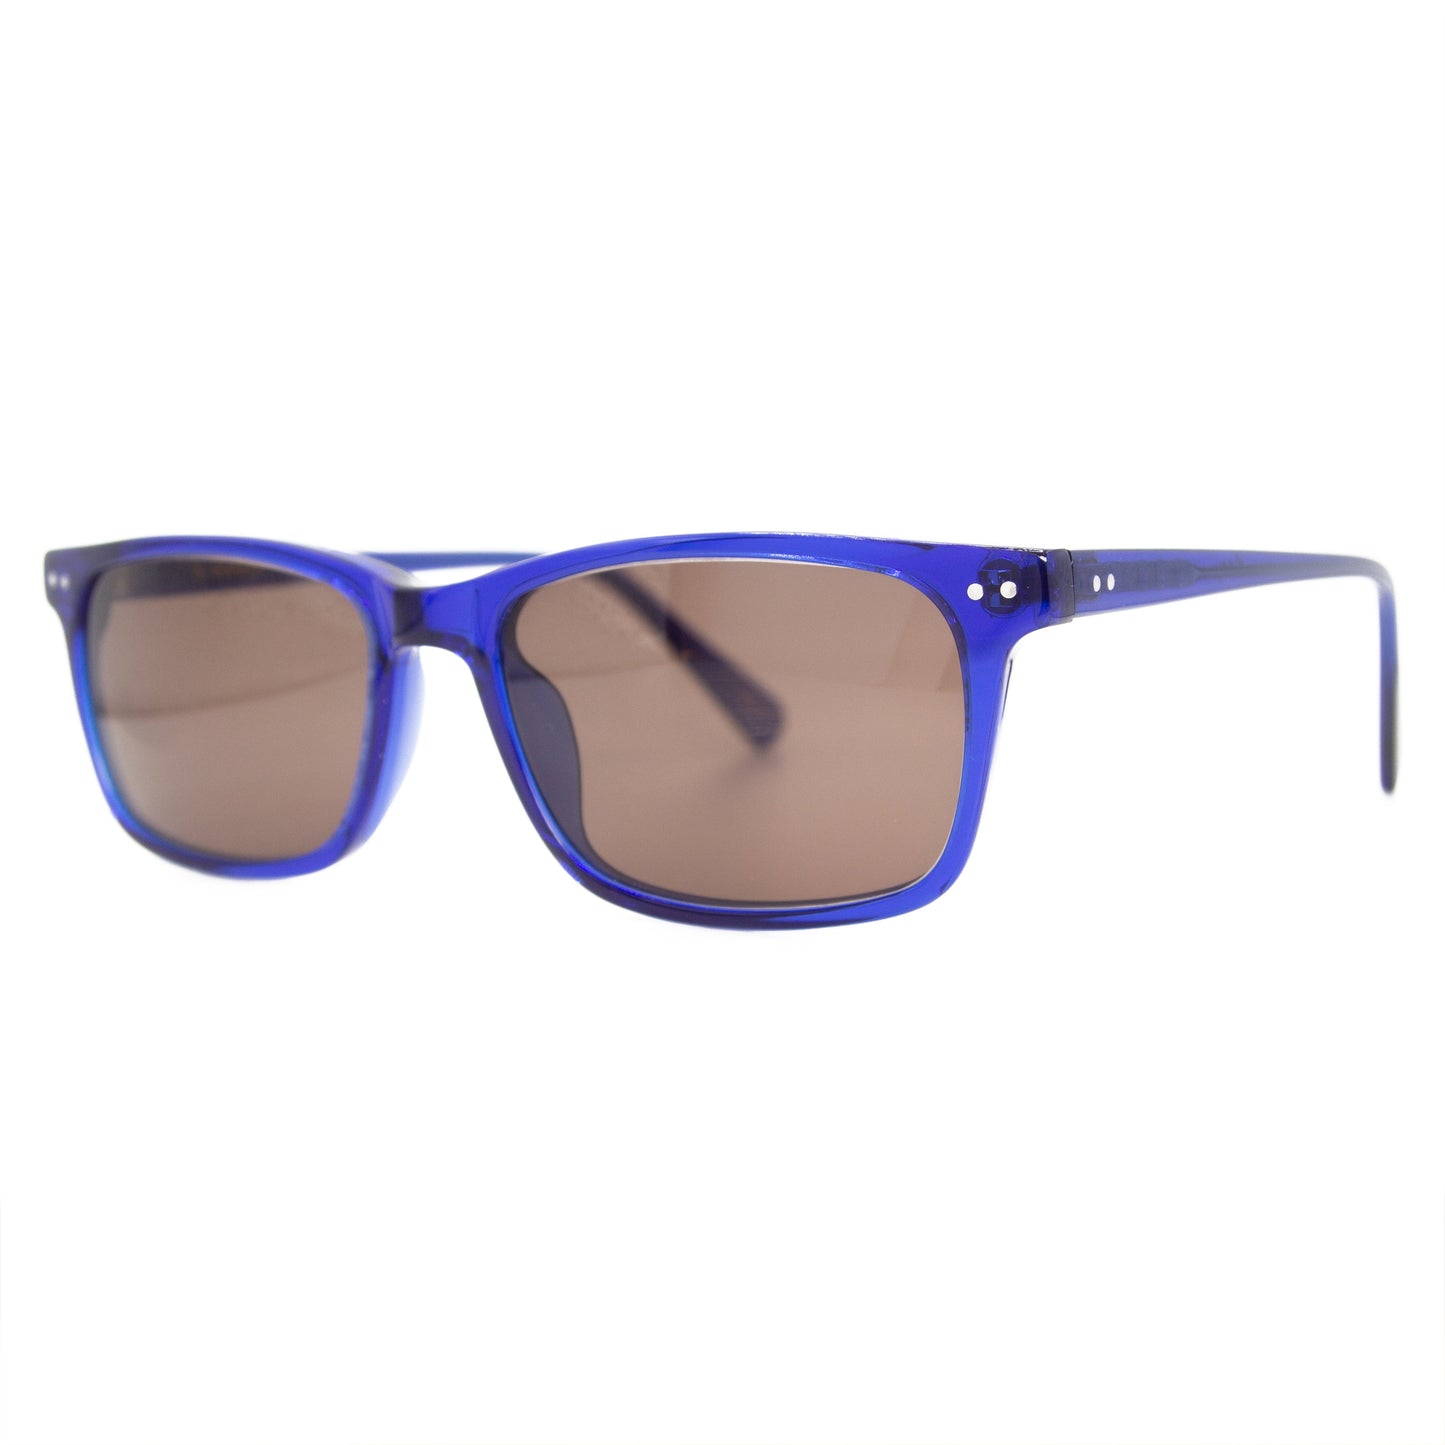 3 brothers - Mr Fred - Navy - Prescription Sunglasses - Side